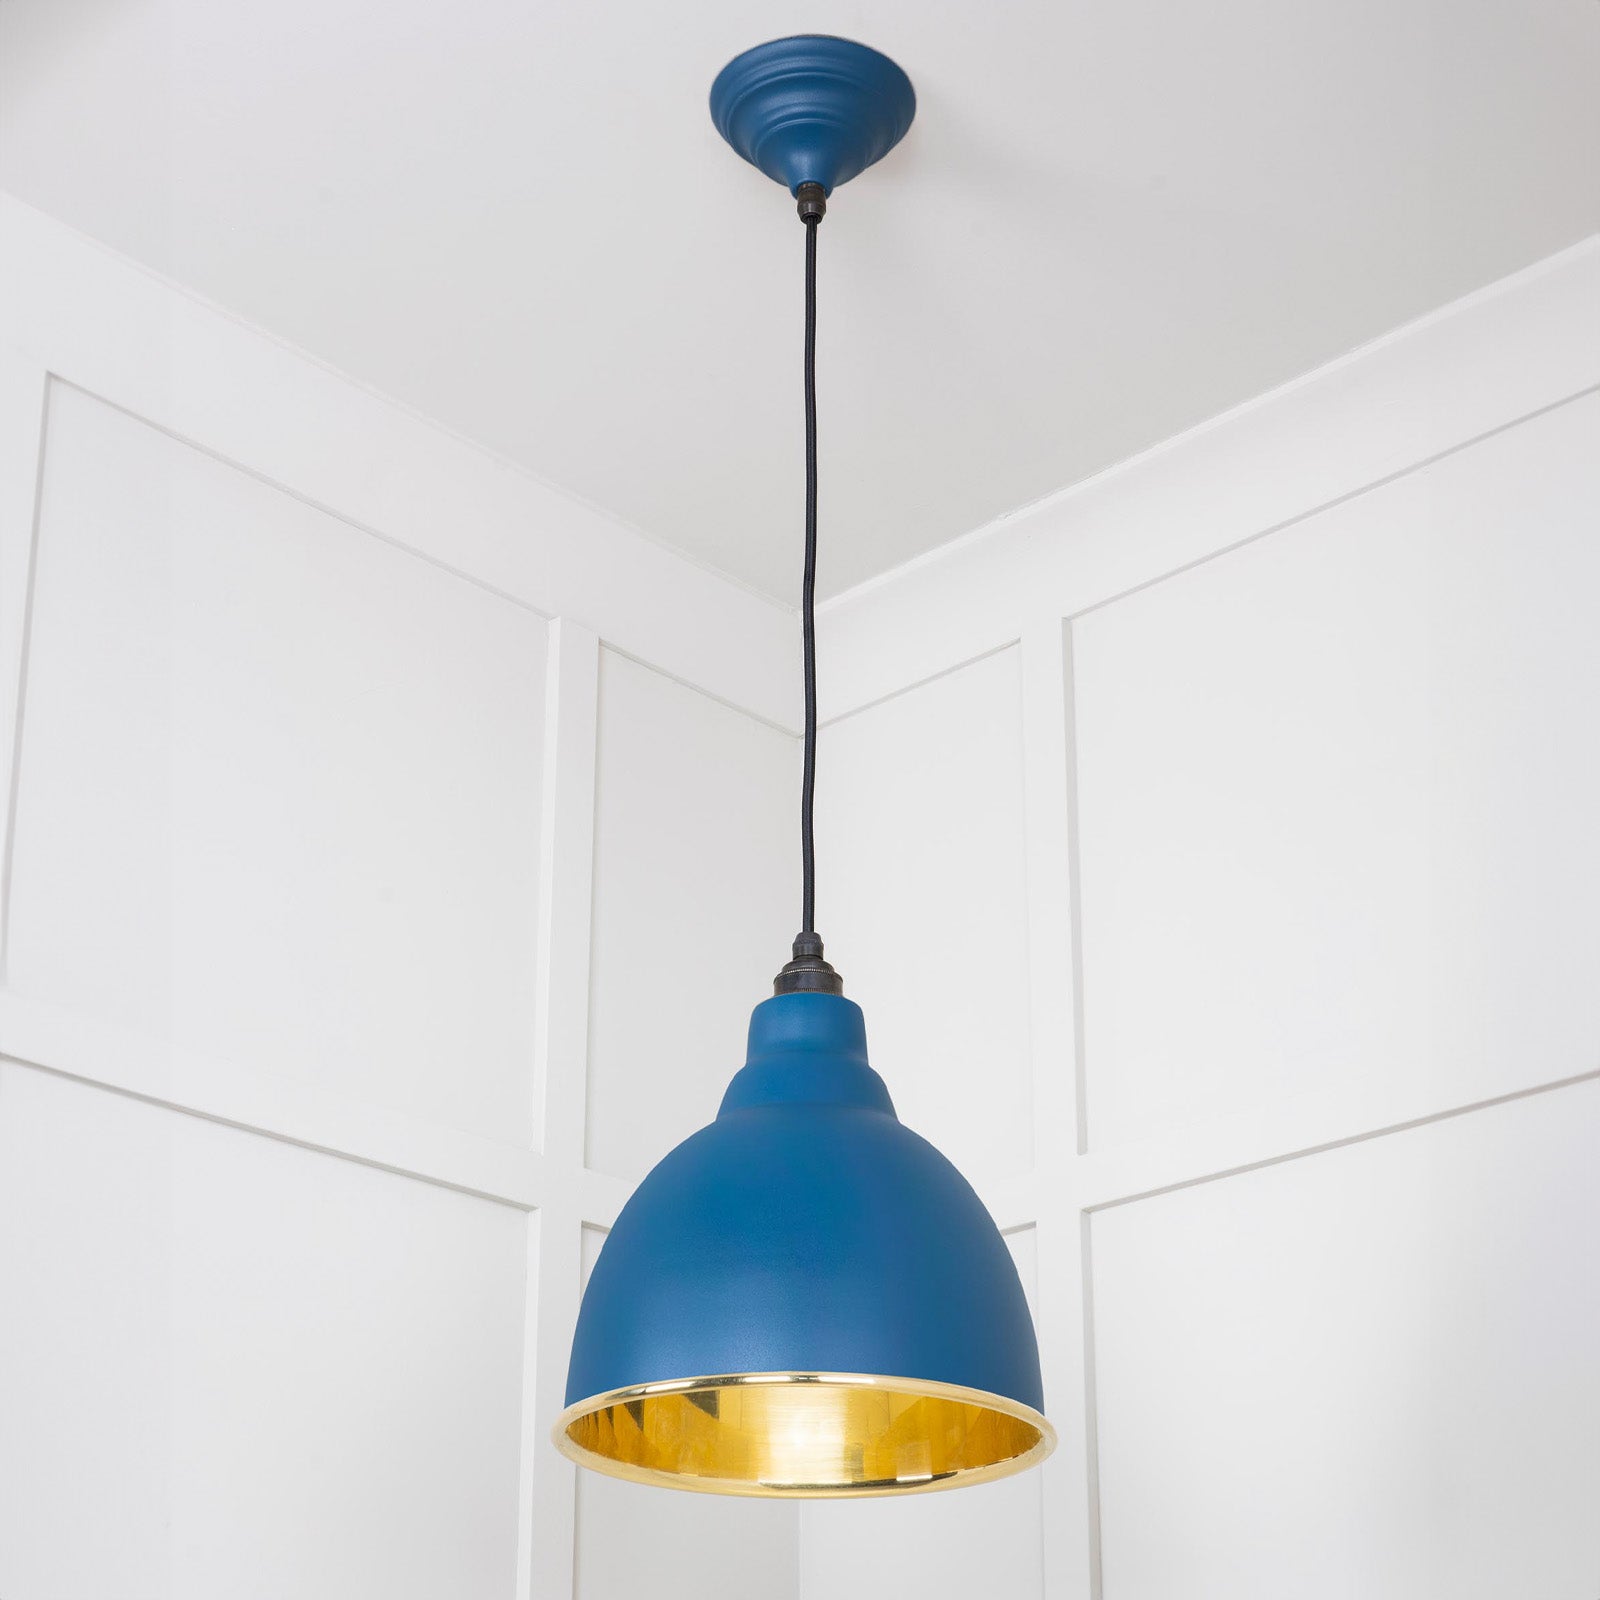 SHOW Full Image of Hanging Brindley Ceiling Light in Upstream